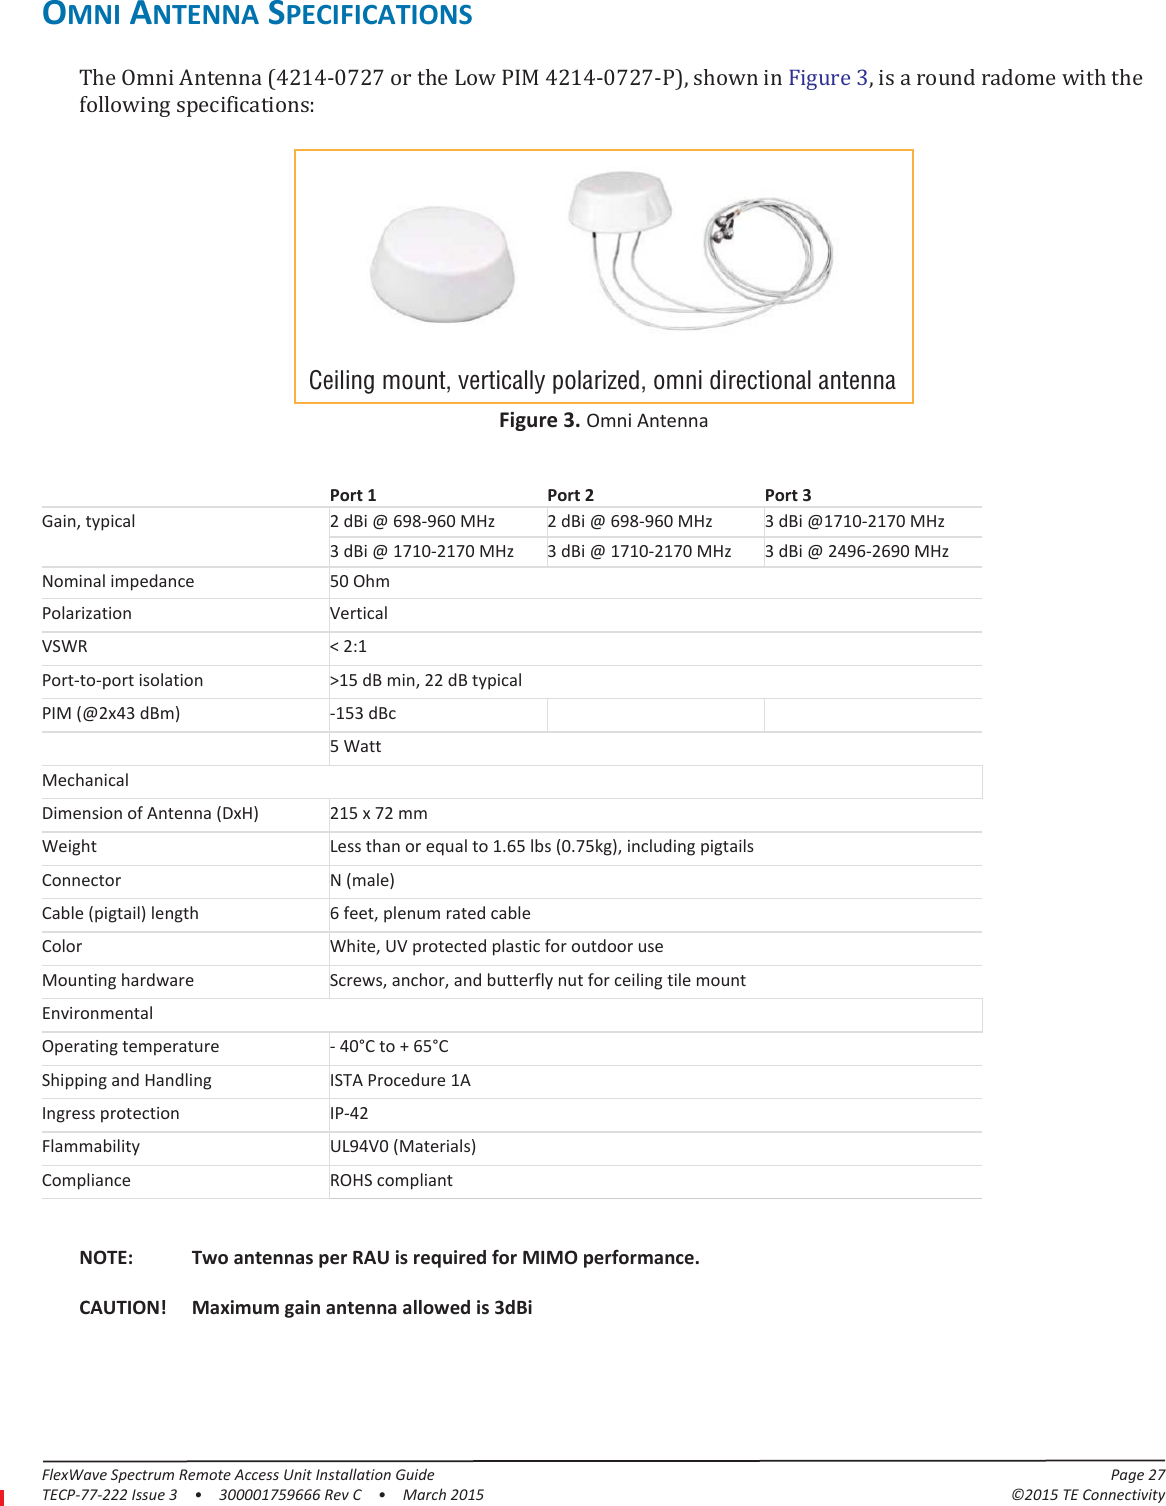 FlexWave Spectrum Remote Access Unit Installation Guide Page 27TECP-77-222 Issue 3  •  300001759666 Rev C  •  March 2015 ©2015 TE ConnectivityOMNI ANTENNA SPECIFICATIONSThe Omni Antenna (4214-0727 or the Low PIM 4214-0727-P), shown in Figure 3, is a round radome with the following specifications:Ceiling mount, vertically polarized, omni directional antennaFigure 3. Omni AntennaPort 1 Port 2 Port 3Gain, typical 2 dBi @ 698-960 MHz 2 dBi @ 698-960 MHz 3 dBi @1710-2170 MHz3 dBi @ 1710-2170 MHz 3 dBi @ 1710-2170 MHz 3 dBi @ 2496-2690 MHzNominal impedance 50 OhmPolarization VerticalVSWR &lt; 2:1Port-to-port isolation &gt;15 dB min, 22 dB typicalPIM (@2x43 dBm) -153 dBcPower rating 5 WattMechanicalDimension of Antenna (DxH) 215 x 72 mmWeight Less than or equal to 1.65 lbs (0.75kg), including pigtailsConnector N (male)Cable (pigtail) length 6 feet, plenum rated cableColor White, UV protected plastic for outdoor useMounting hardware Screws, anchor, and butterfly nut for ceiling tile mountEnvironmentalOperating temperature - 40°C to + 65°CShipping and Handling ISTA Procedure 1AIngress protection IP-42Flammability UL94V0 (Materials)Compliance ROHS compliantNOTE: Two antennas per RAU is required for MIMO performance.CAUTION! Maximum gain antenna allowed is 3dBi